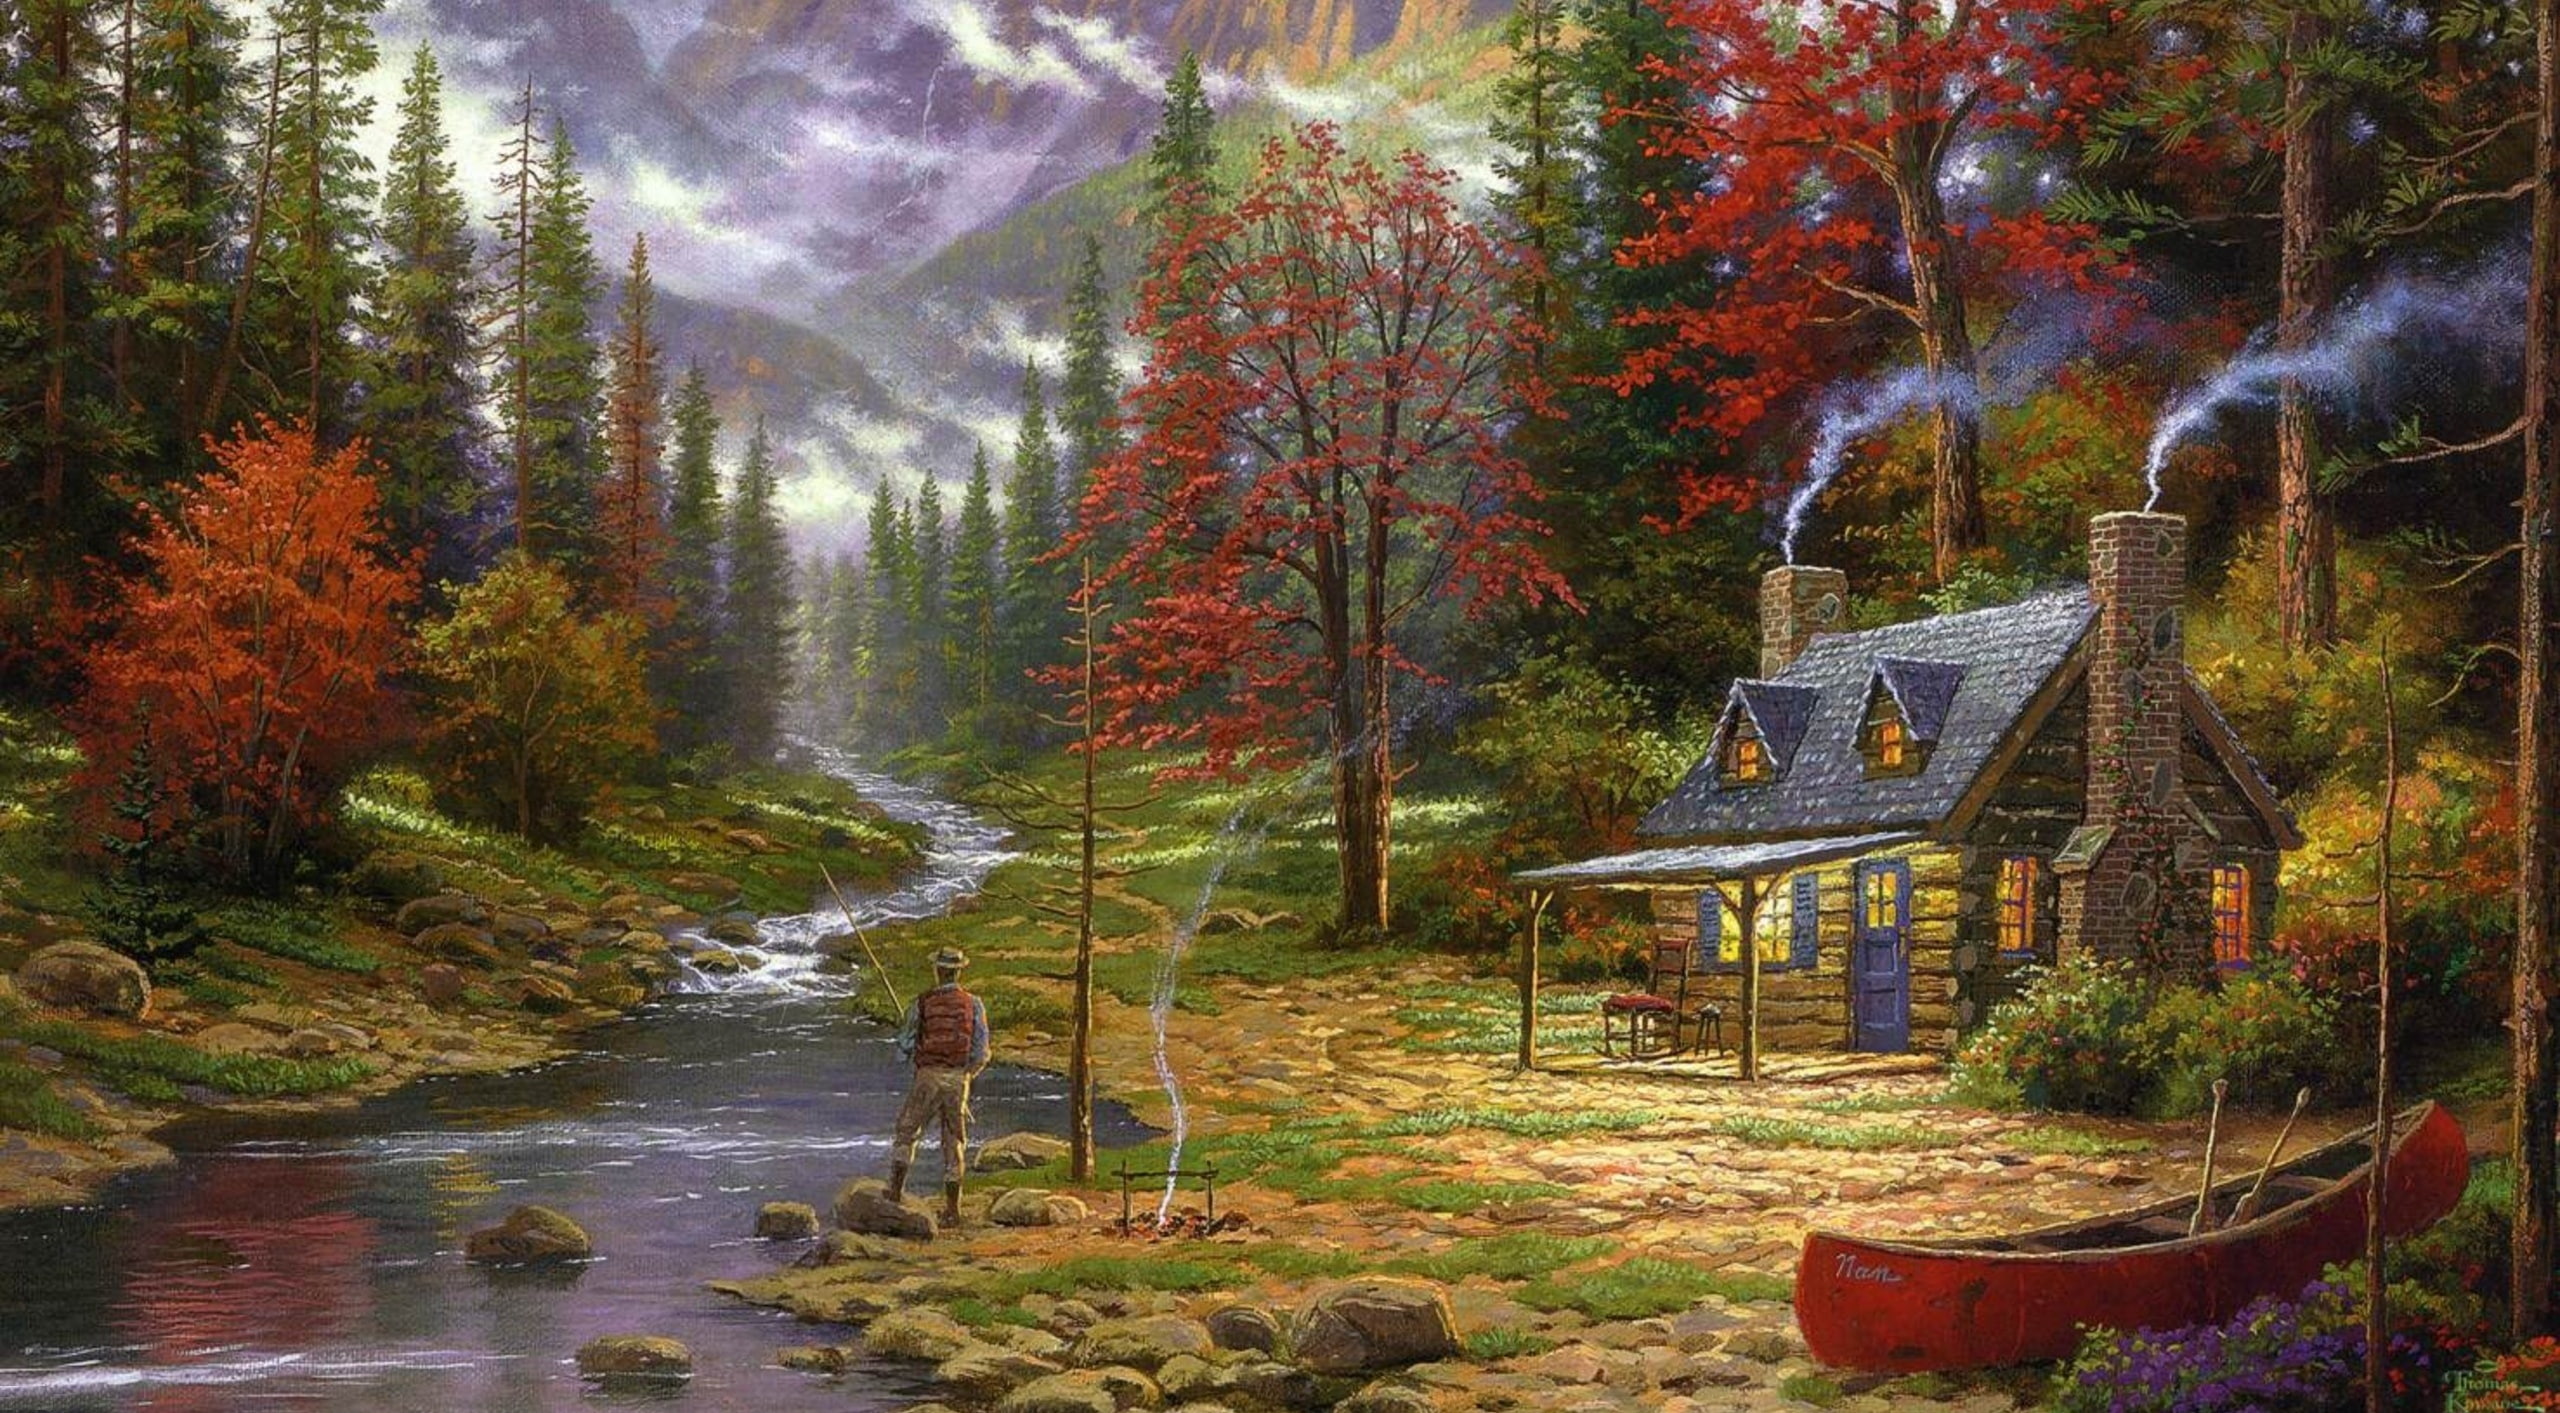 The Good Life by Thomas Kinkade HD Wallpaper, fisherman near house surrounded by trees painting